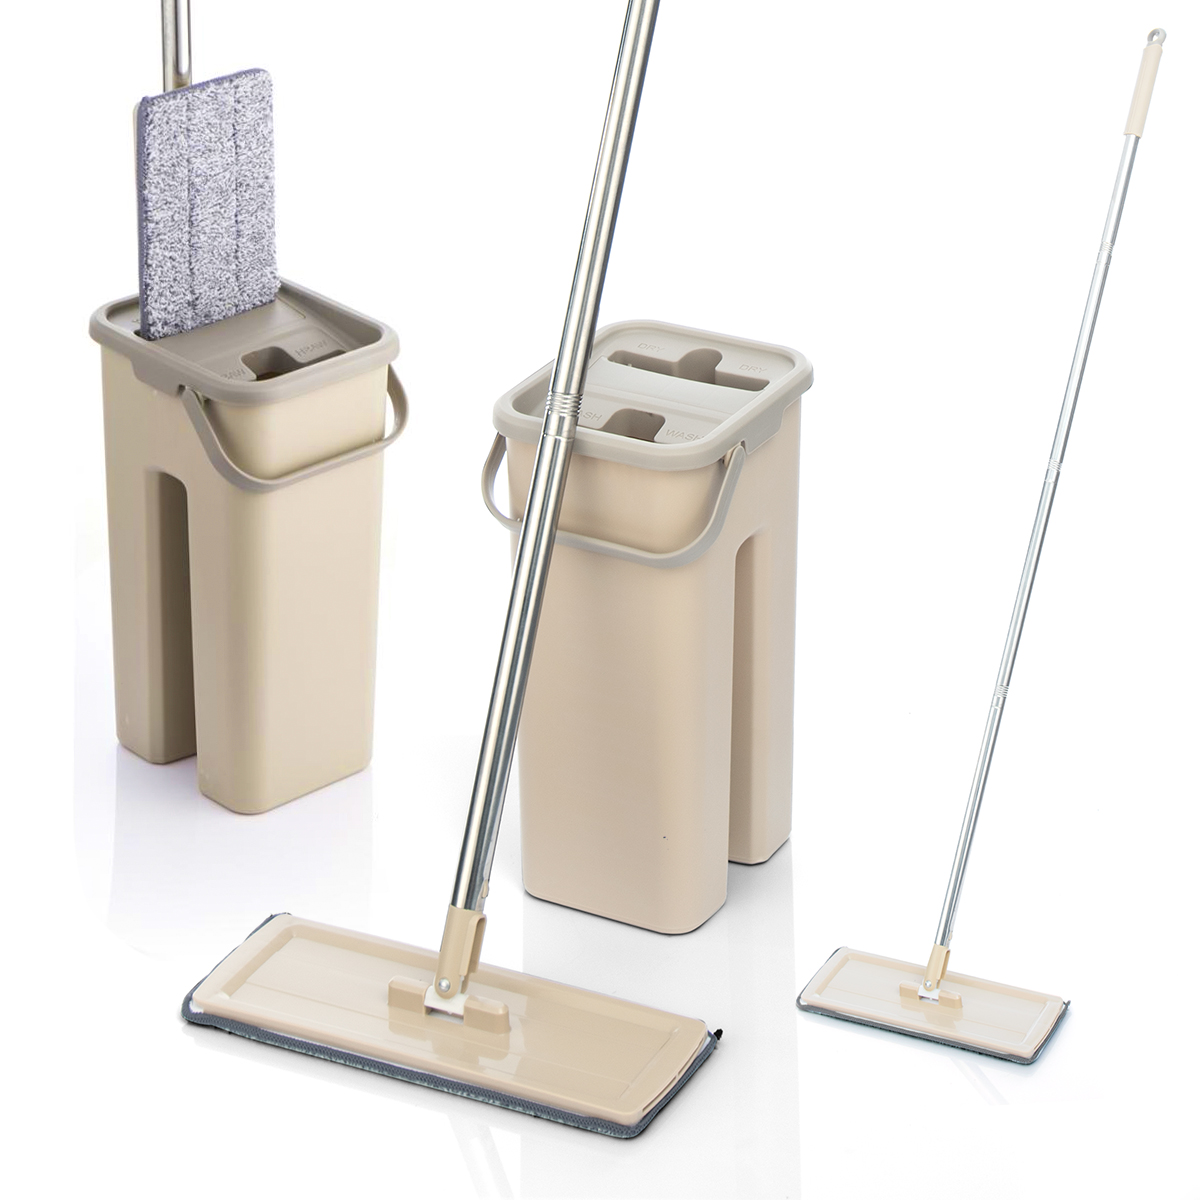 

Fat Squeeze Mop Bucket System with Hand Free Wash Microfiber Mop Pads Stainess Stee Poe Usage Hardwood Foor Ceaning Toos